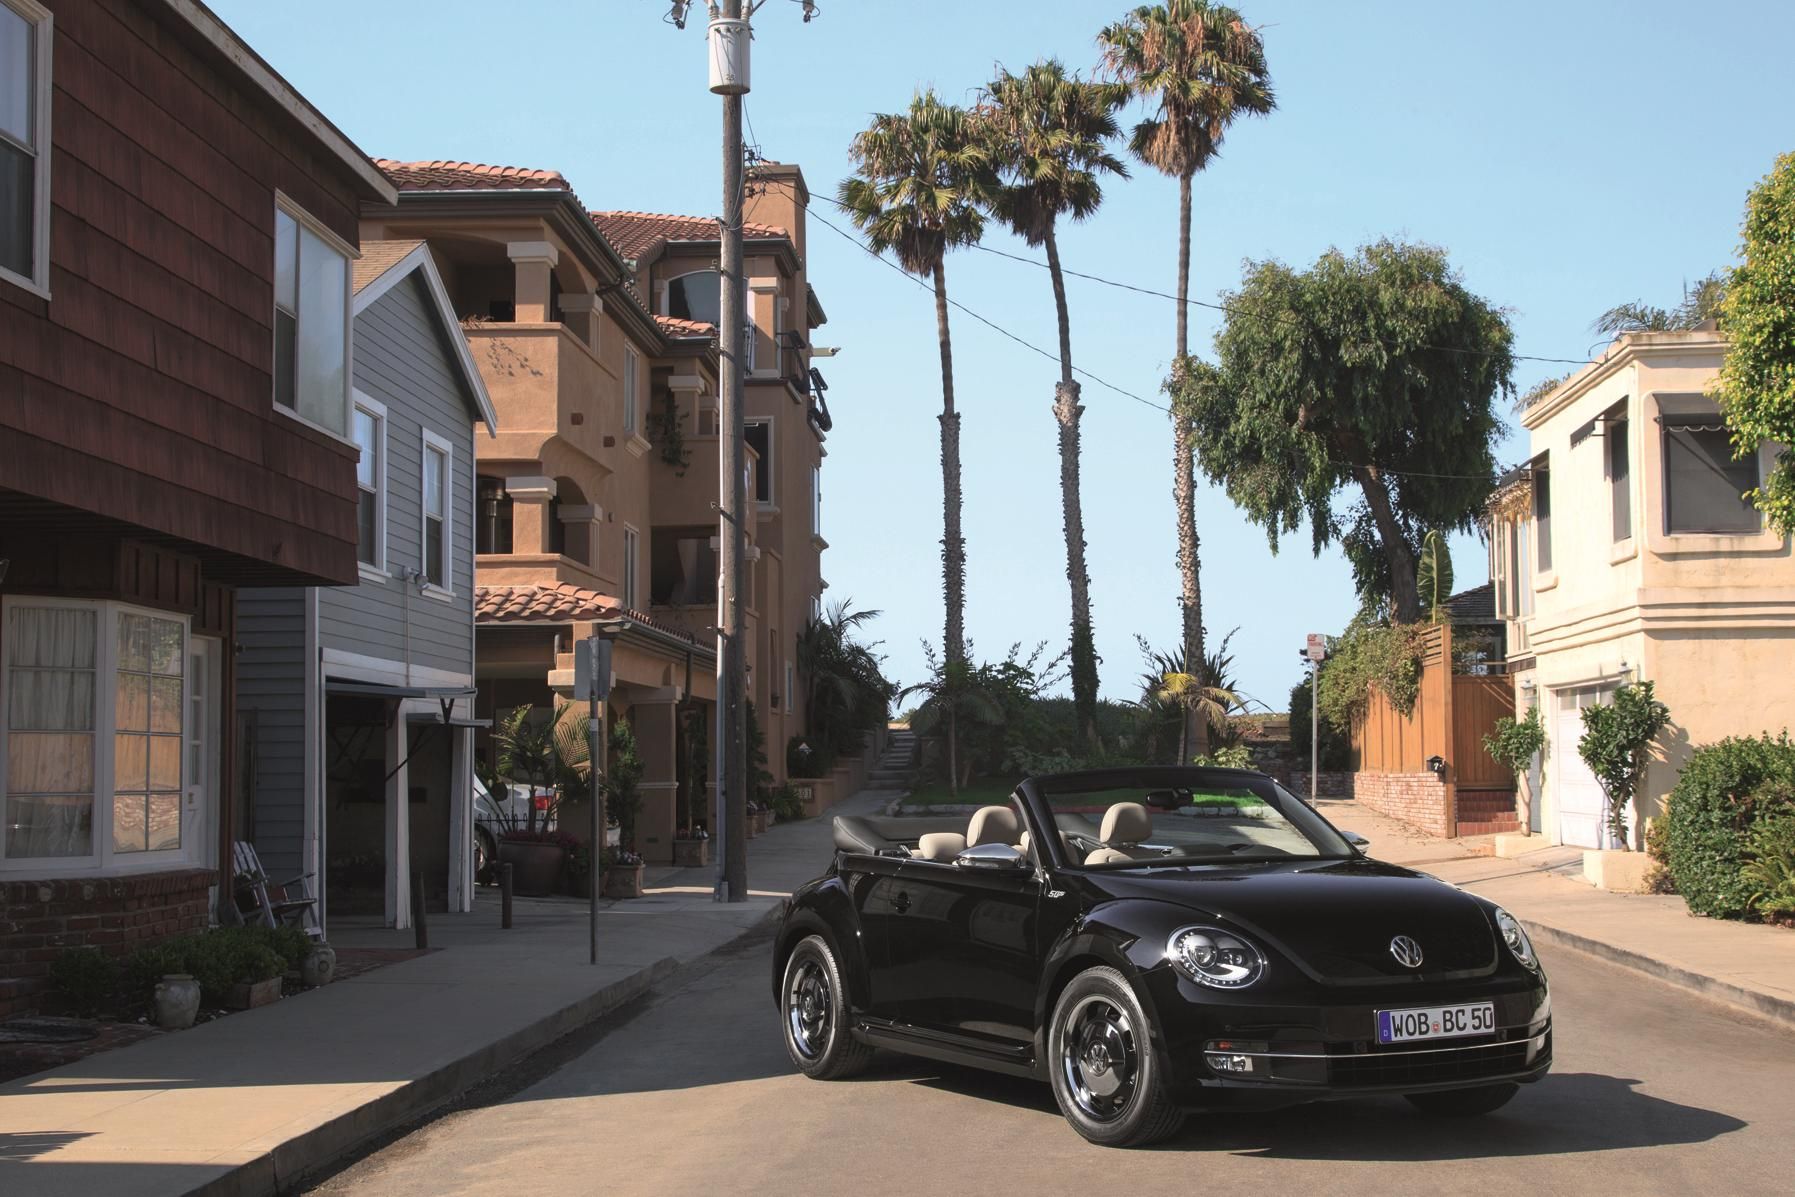 2013 Volkswagen Beetle Cabrio 50s, 60s and 70s Editions